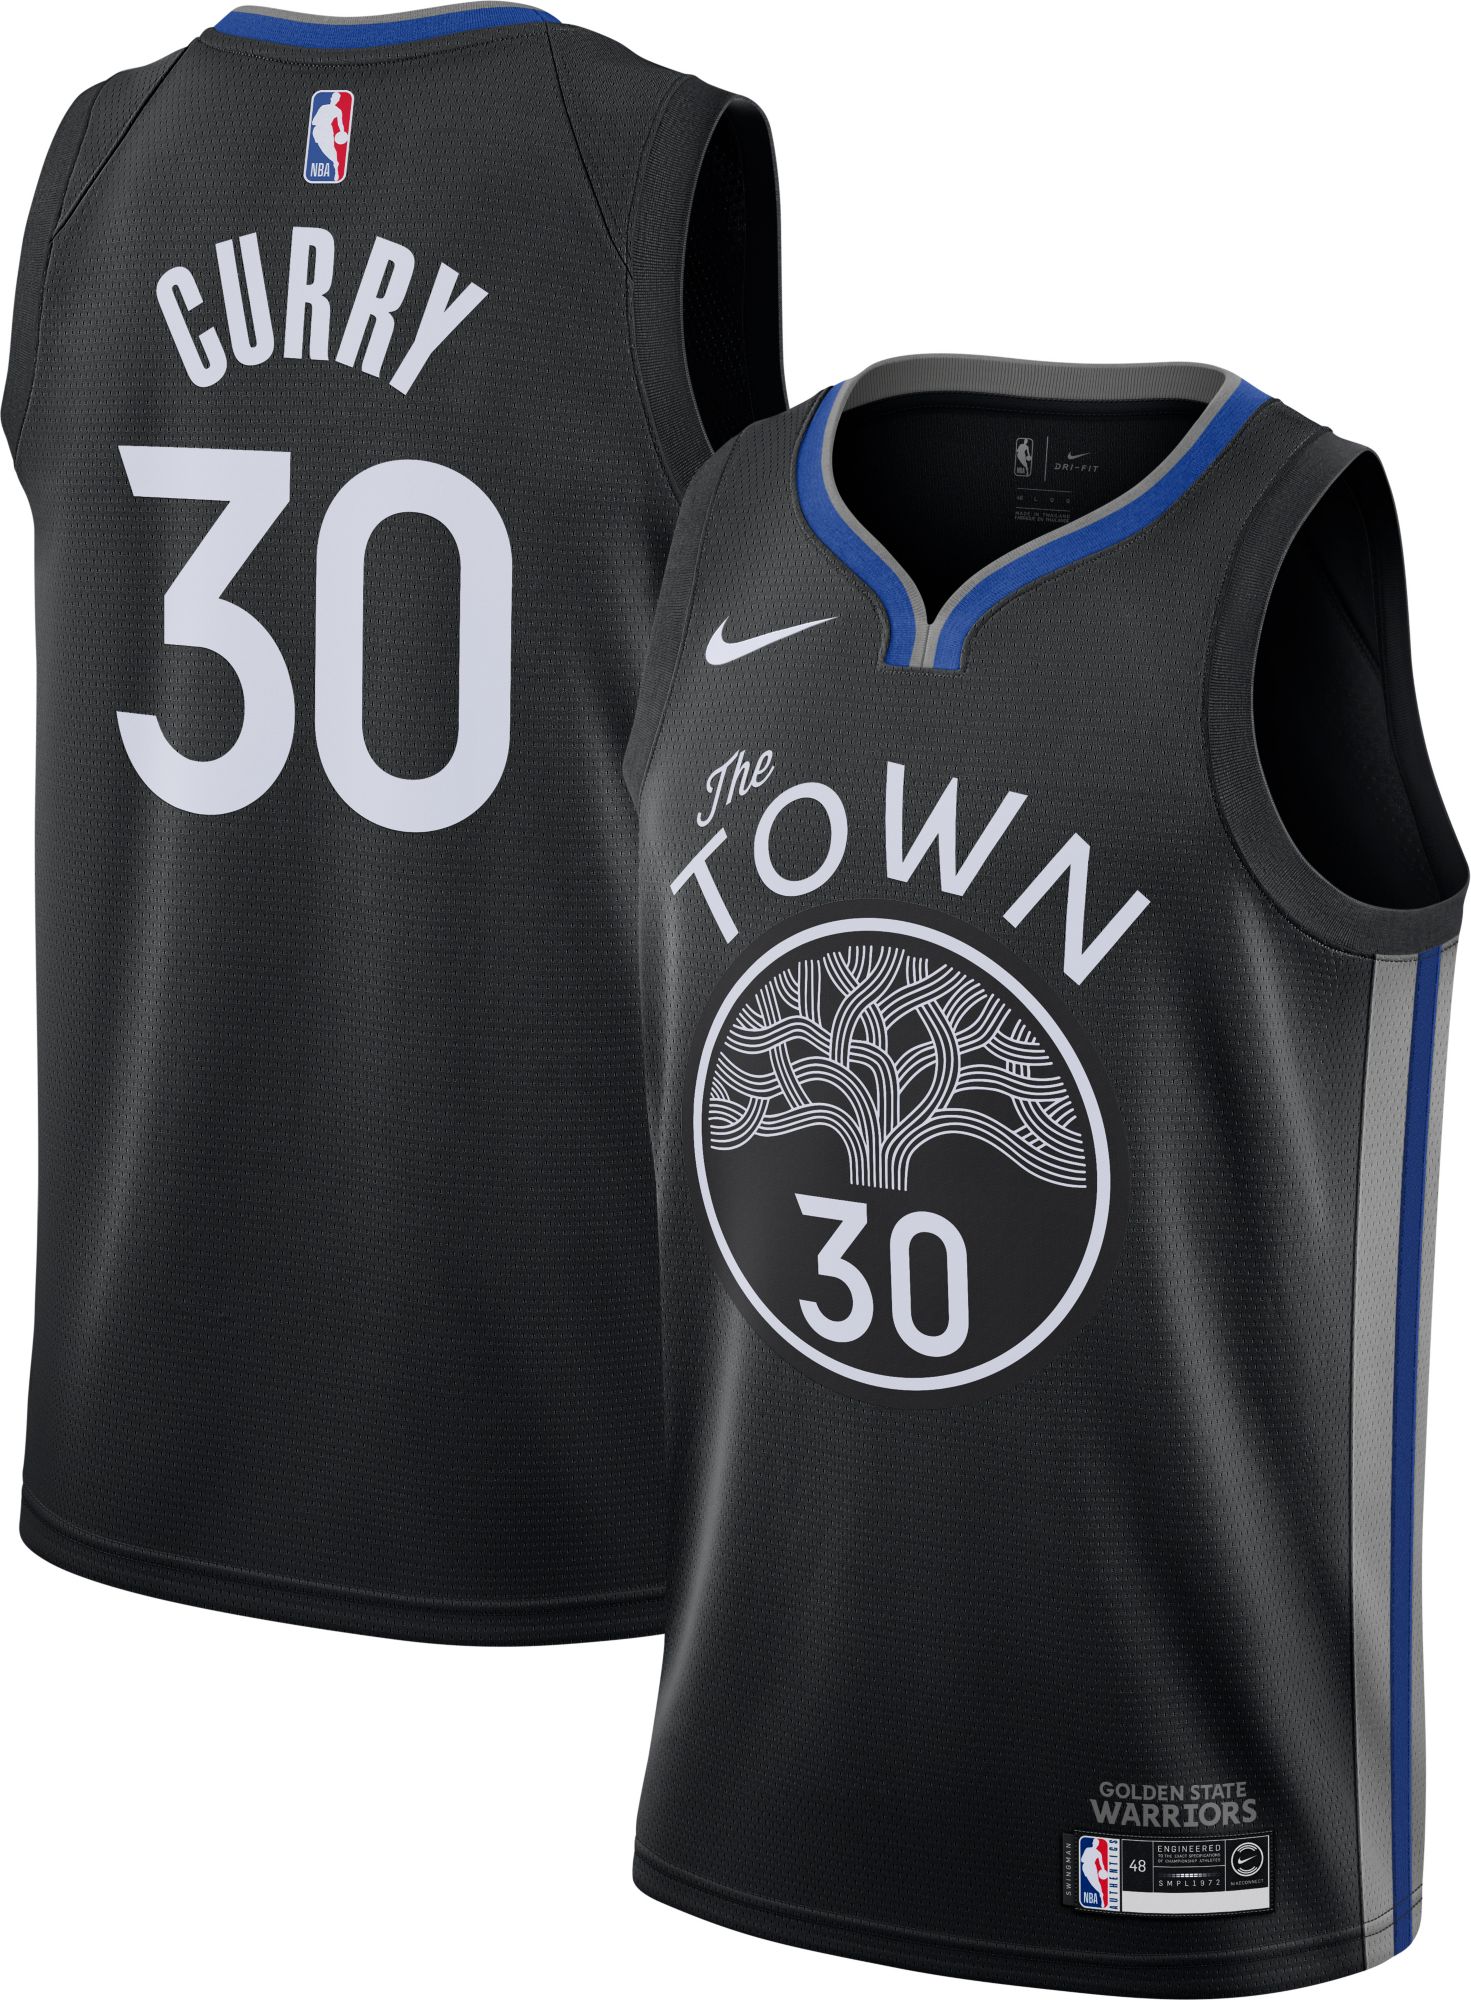 curry jersey cheap